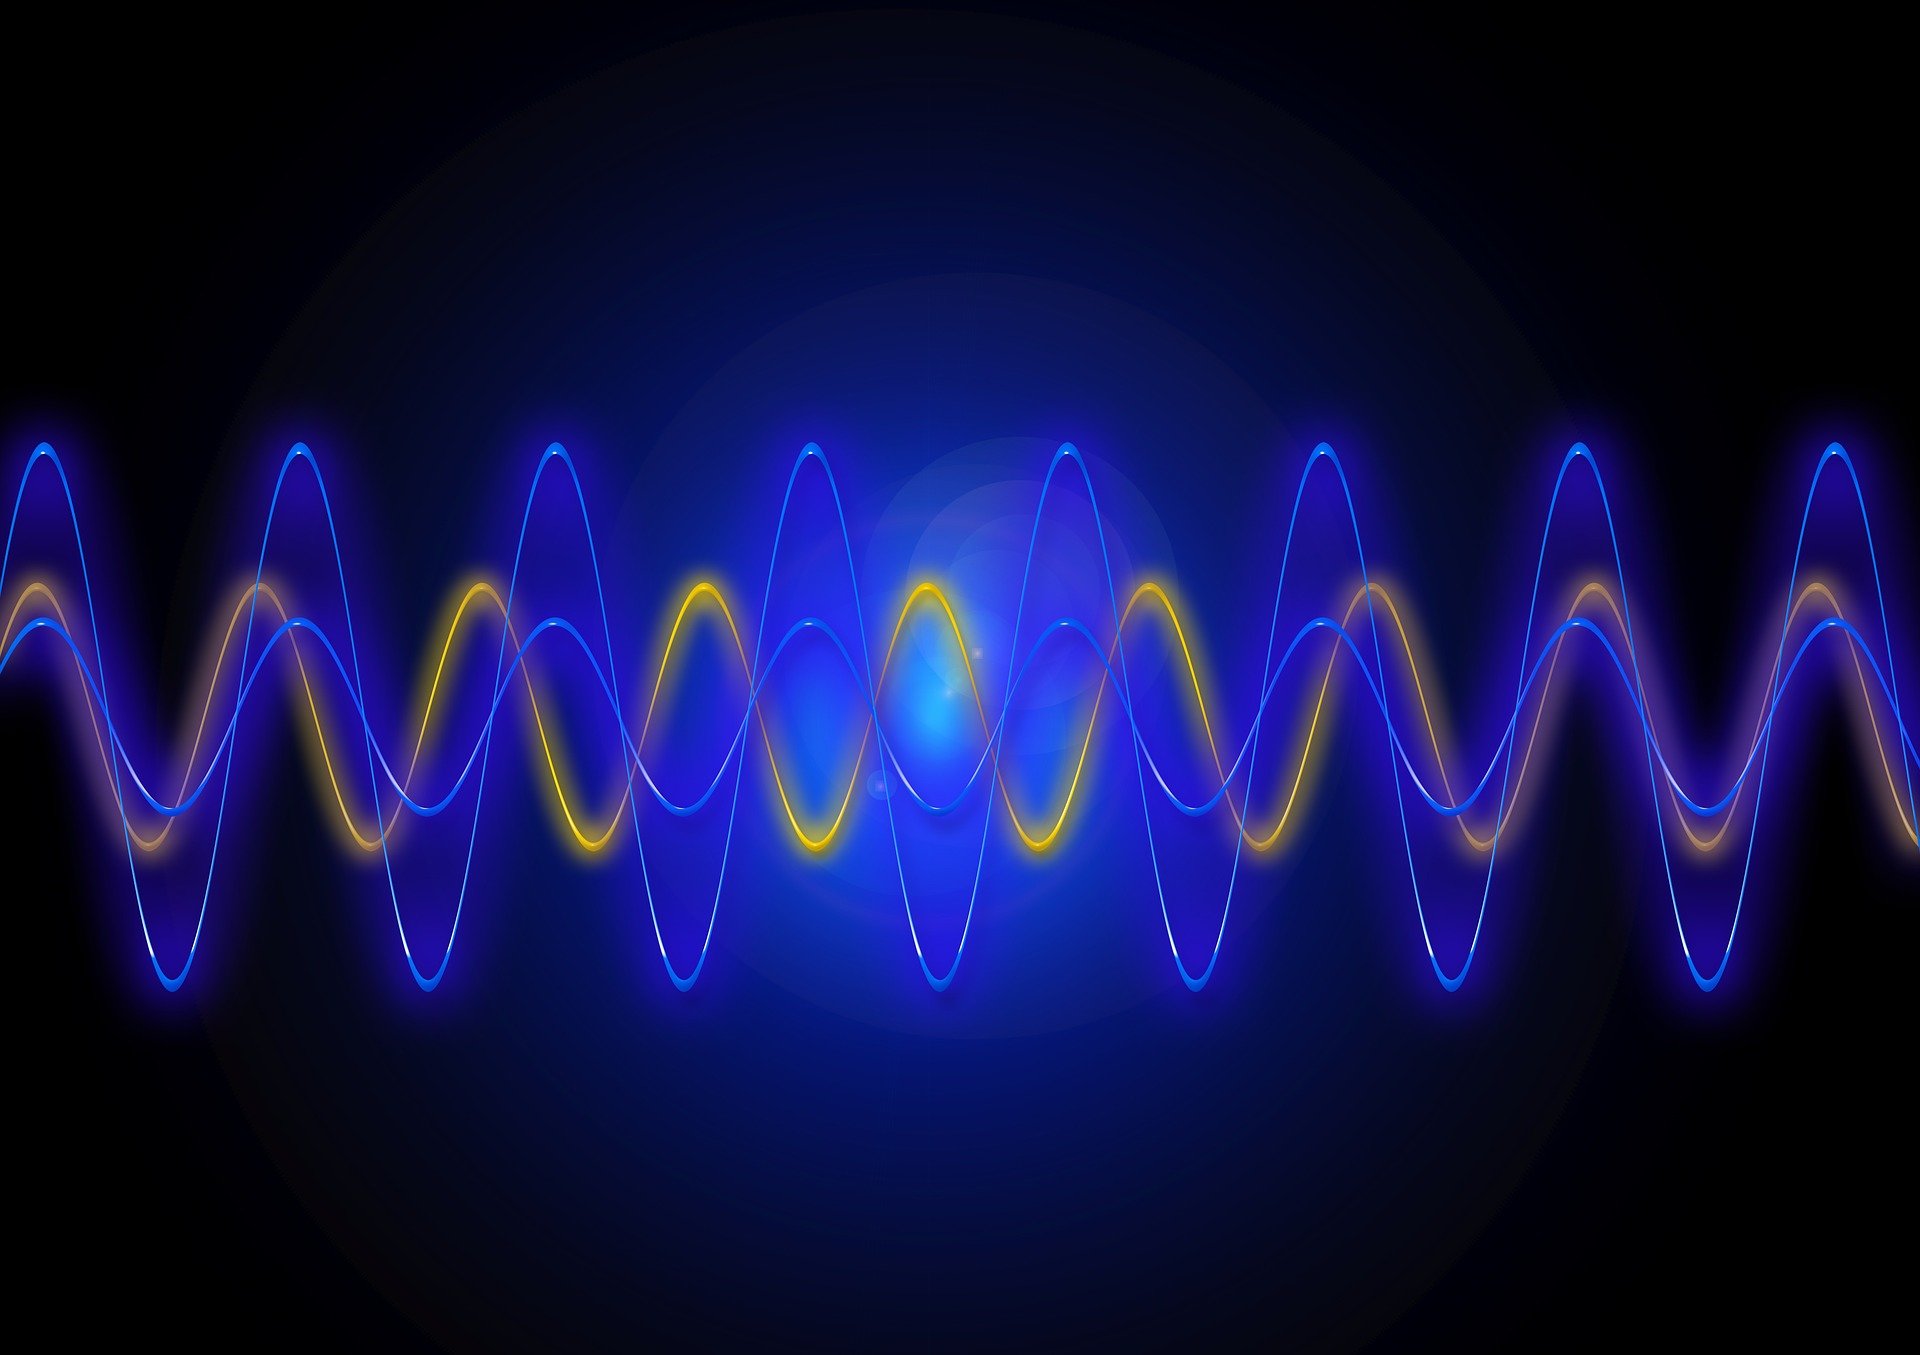 Sound waves in piezoelectric materials guide electrons